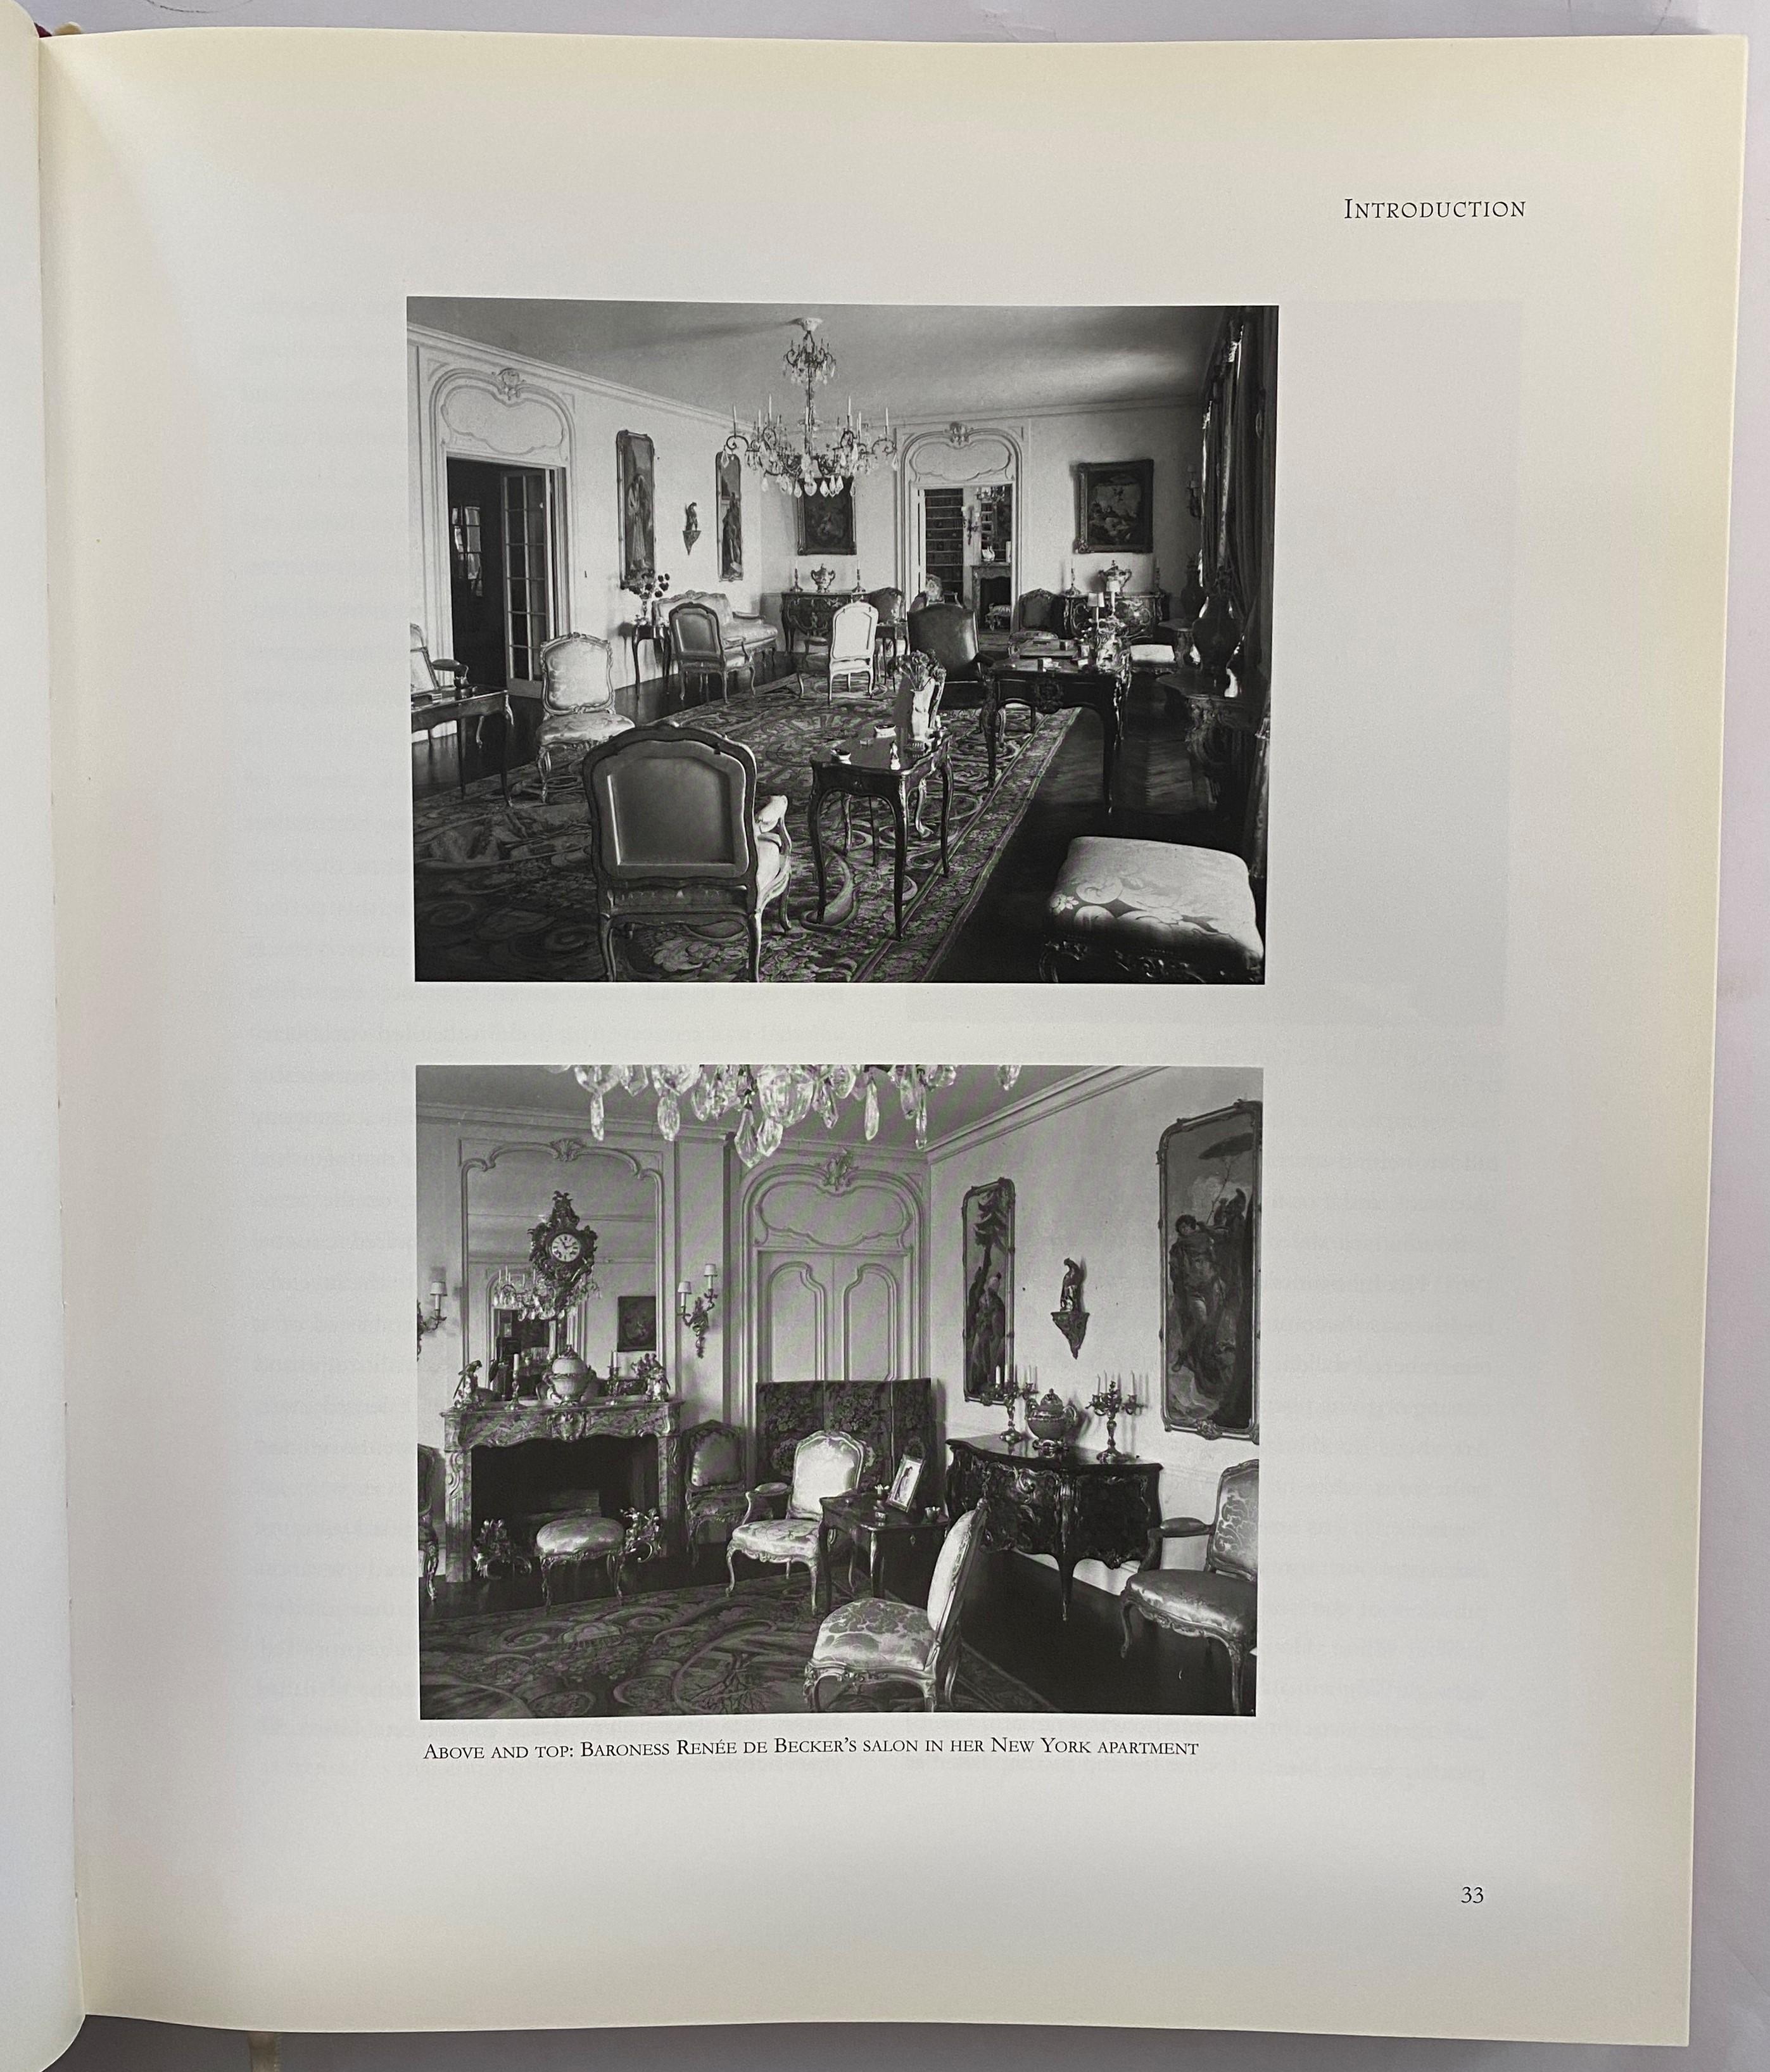 Patronized by Captains of Industry, Leaders of international society, and the occasional dictator, Maison Jansen was the most famous and influential interior decorating house of the 20th century, founded in Paris by Dutch entrepreneur Jean-Henri